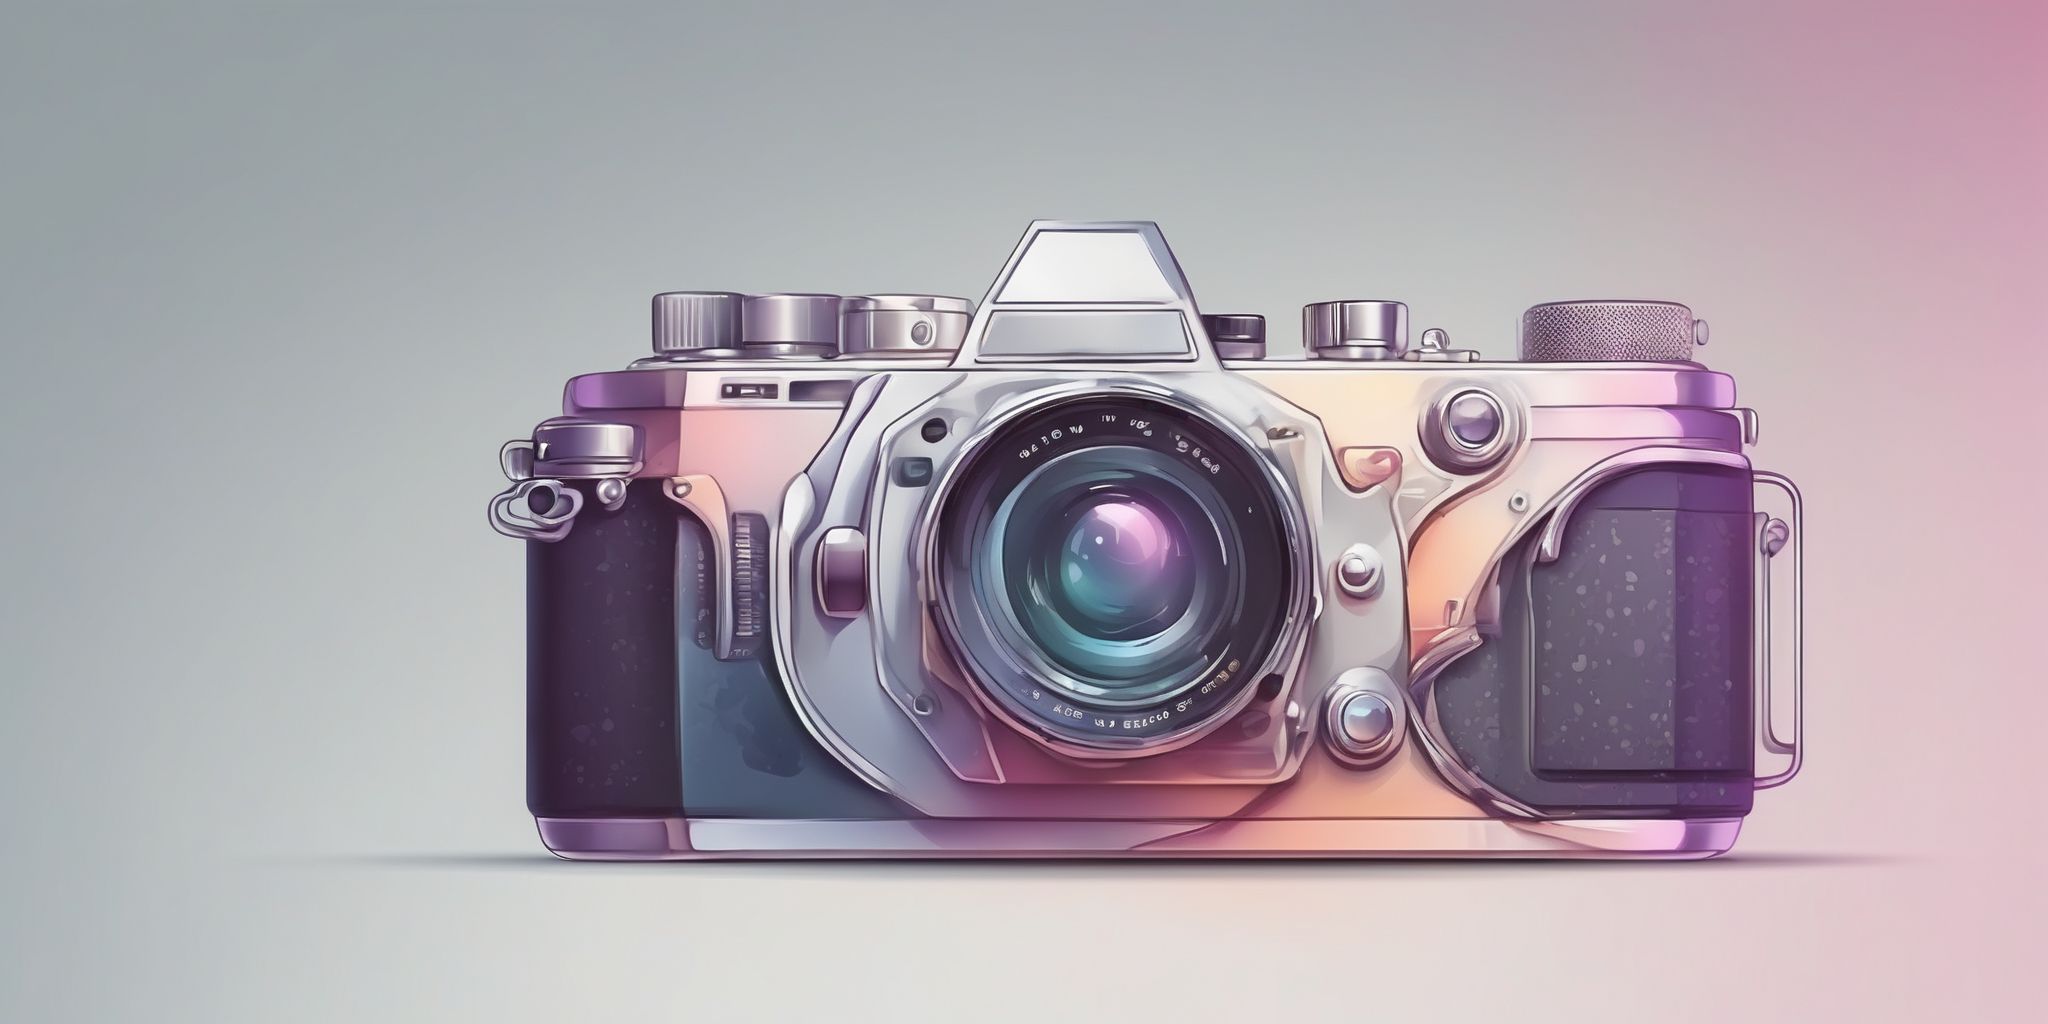 camera in illustration style with gradients and white background